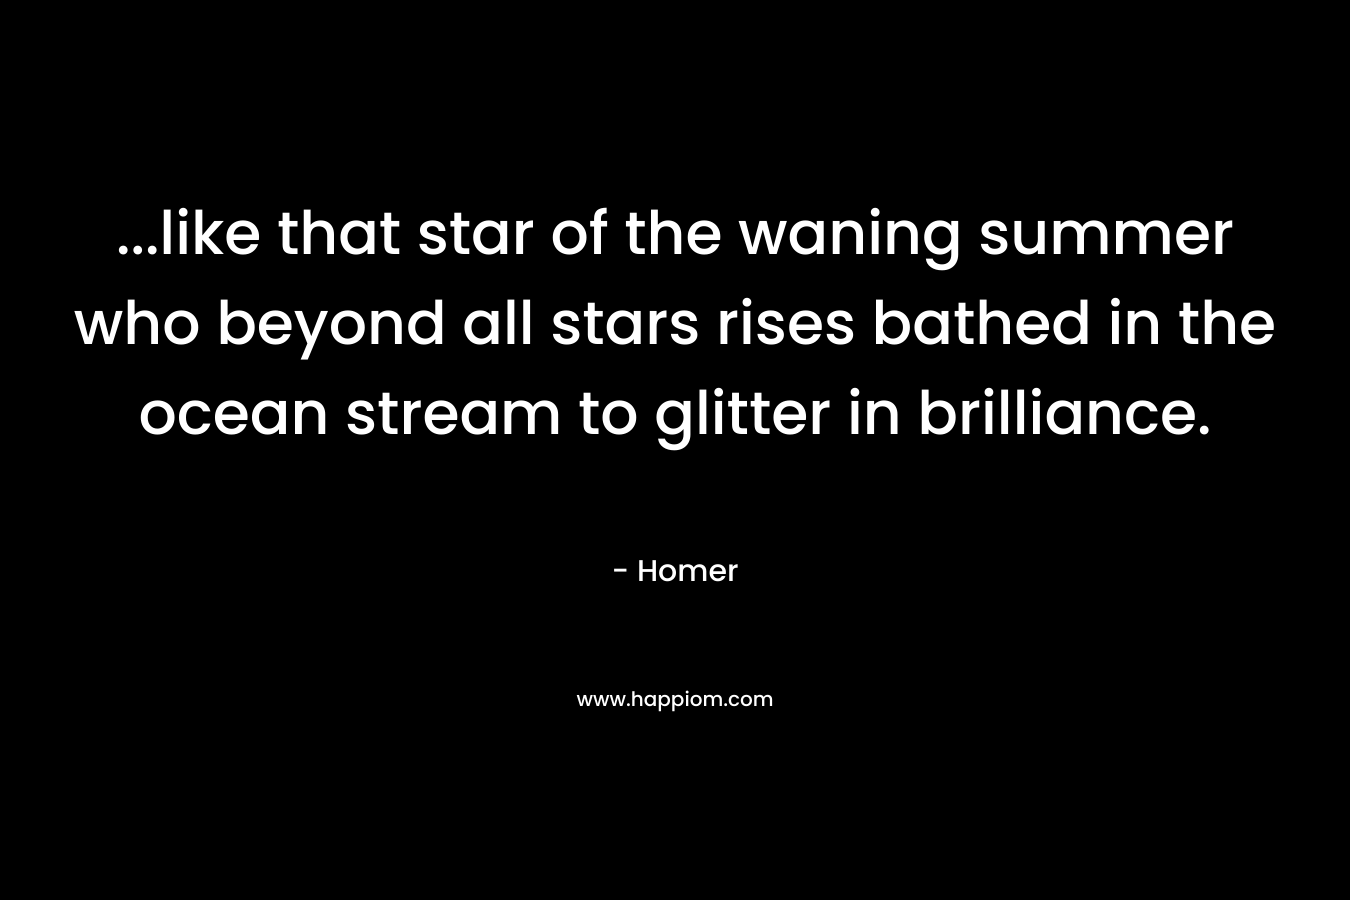 ...like that star of the waning summer who beyond all stars rises bathed in the ocean stream to glitter in brilliance.